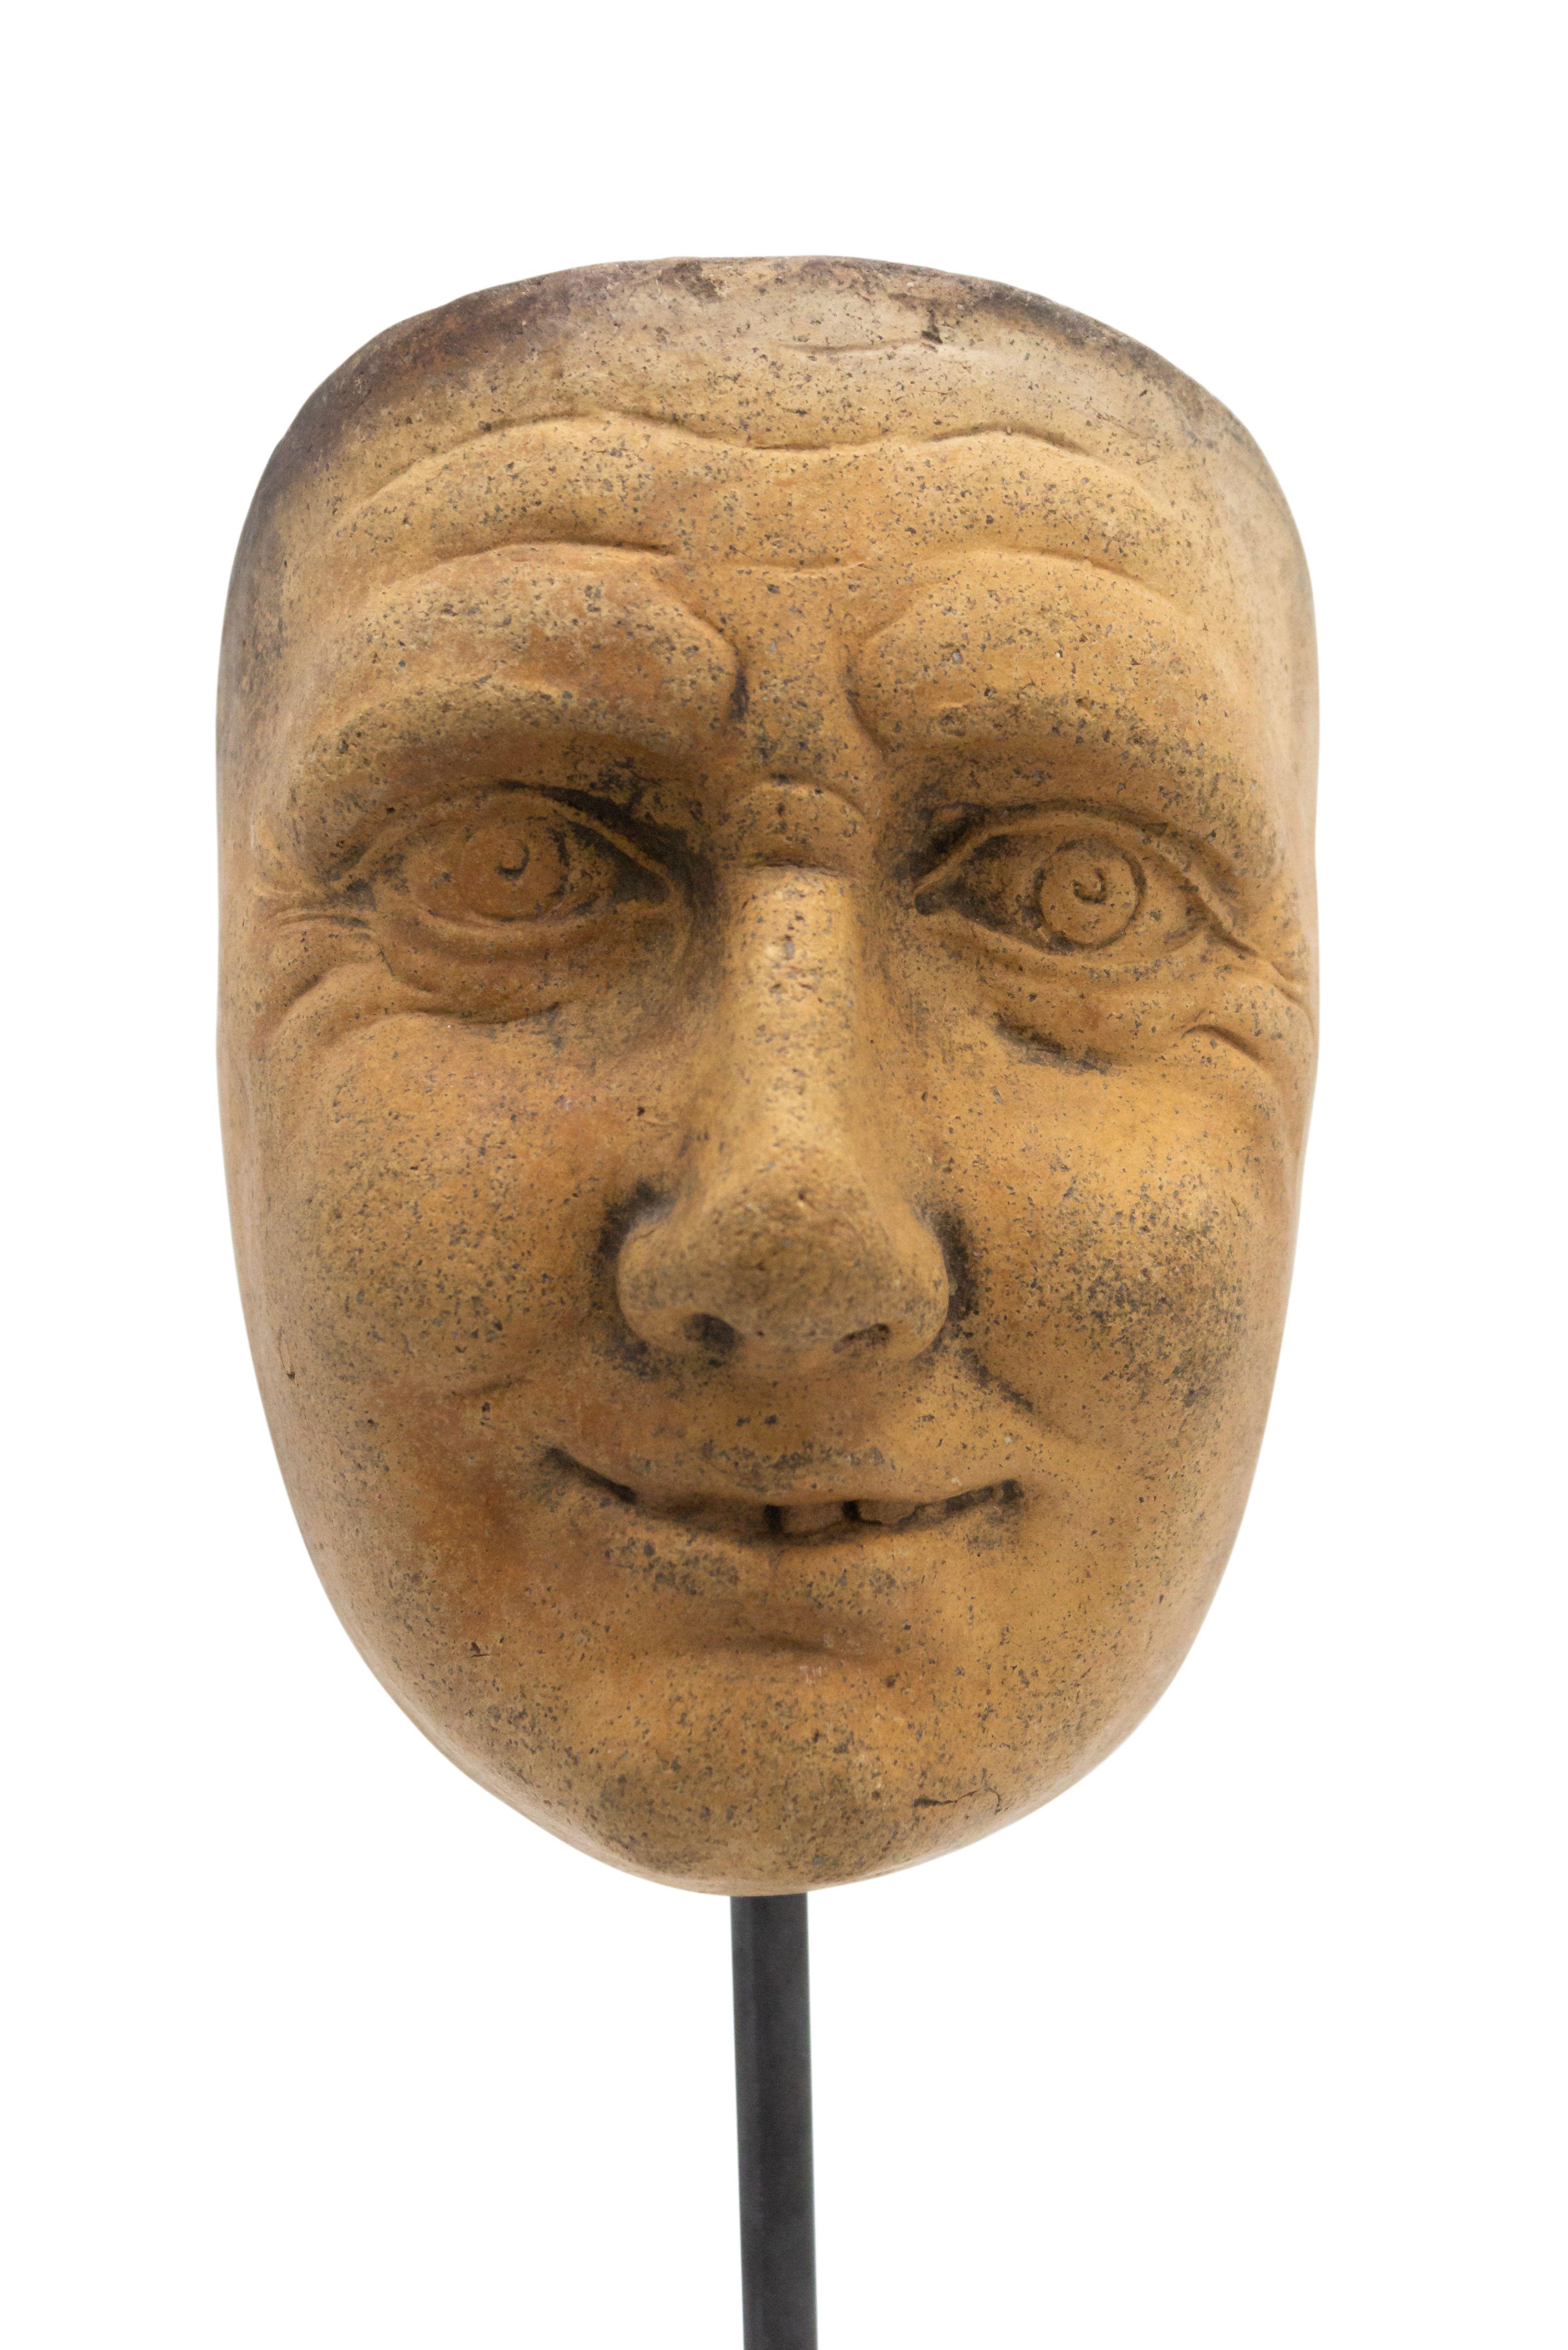 Continental German (late 19th Cent) sculpted terra-cotta master mask mold of a grinning face with intense eyes displayed on a square black marble base stand (part of a collection).
 